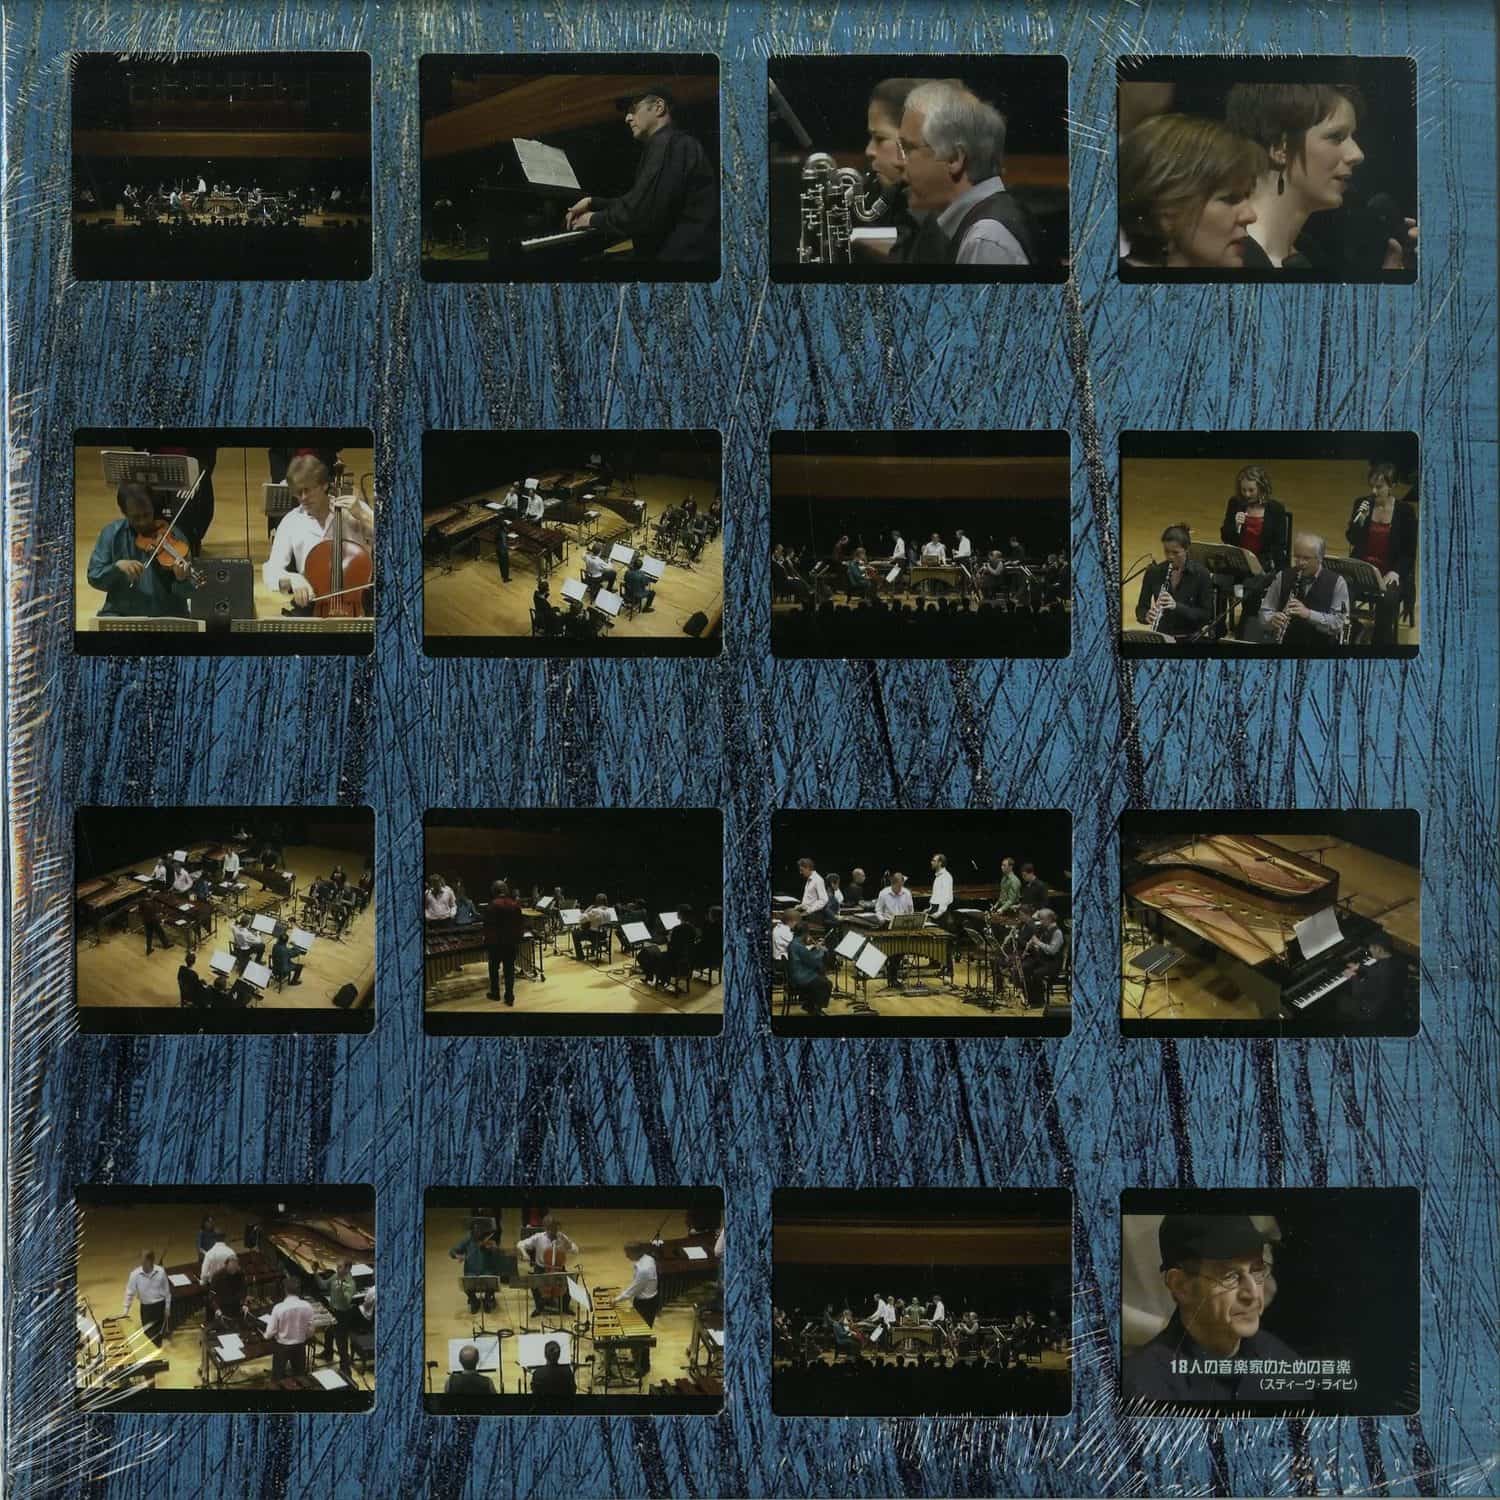 Steve Reich & Ensemble Modern & Synergy Vocals - MUSIC FOR 18 MUSICANS 